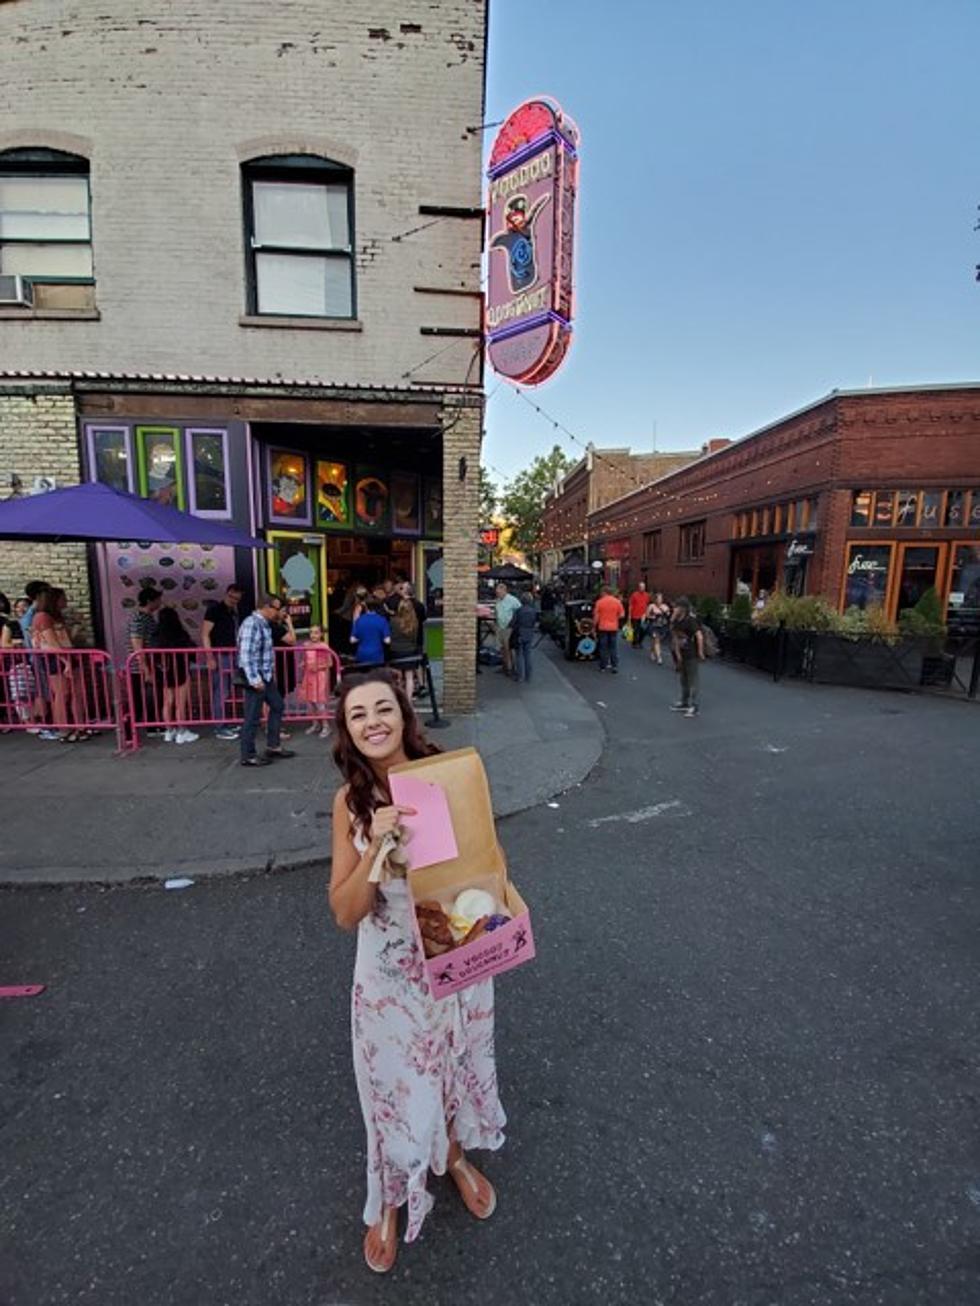 Finally Trying Famous Voodoo Doughnuts in Portland